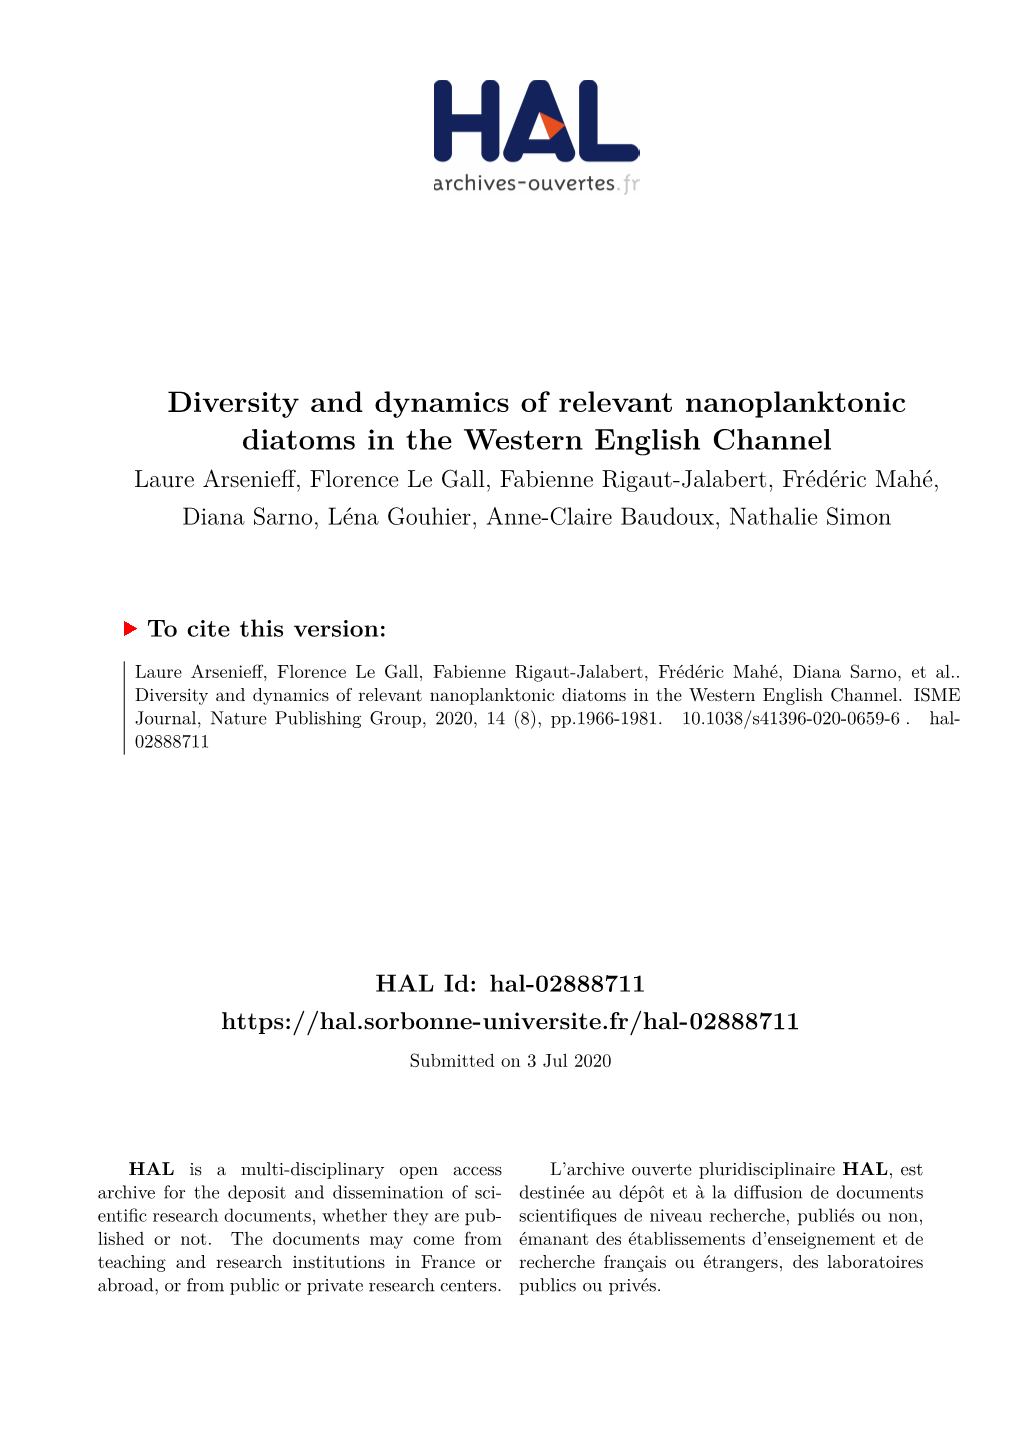 Diversity and Dynamics of Relevant Nanoplanktonic Diatoms in The